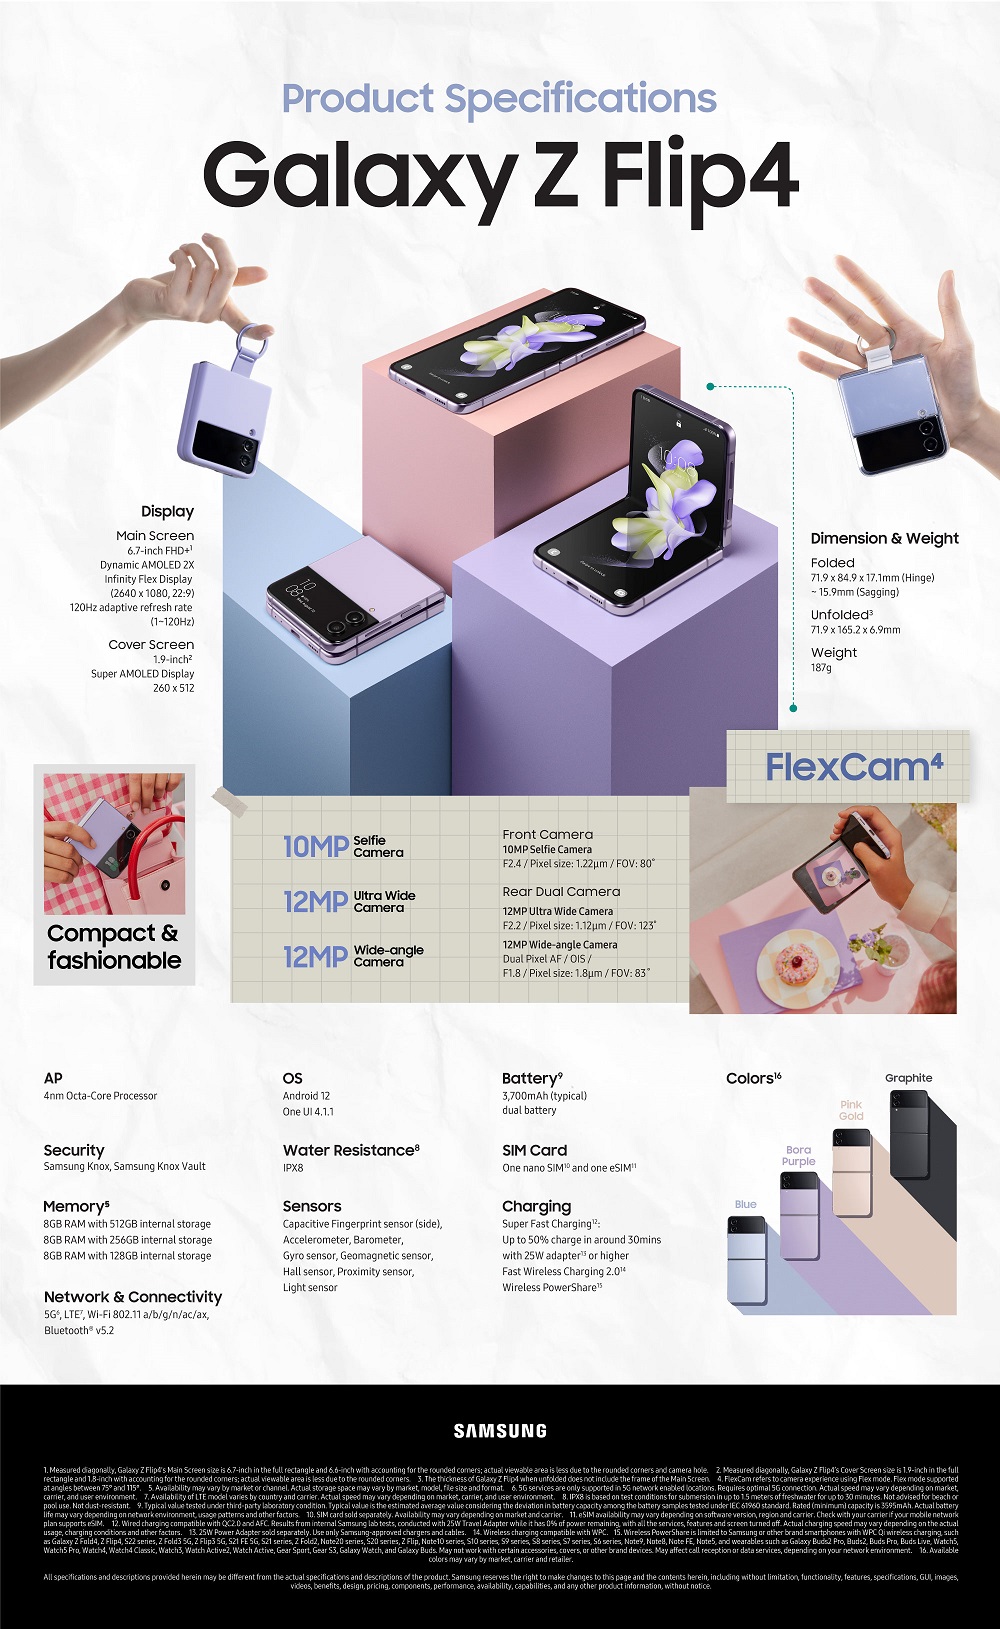 [Infographic] Galaxy Z Flip4: The Ultimate Tool for Self-Expression